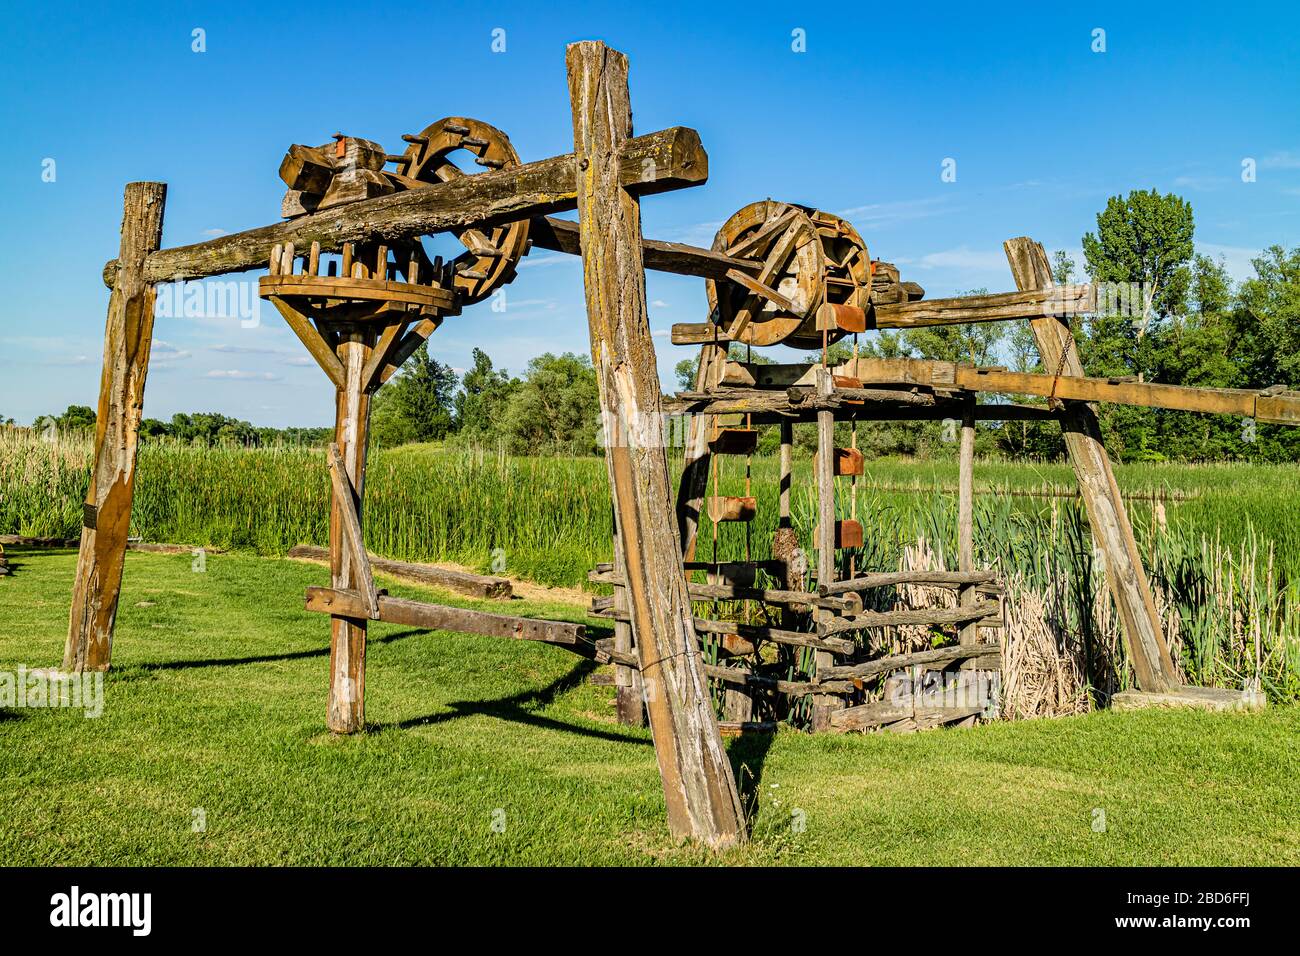 A traditional wooden water well at the visitor centre for Zasavica national nature park, Zasavica, Serbia. May 2017. Stock Photo